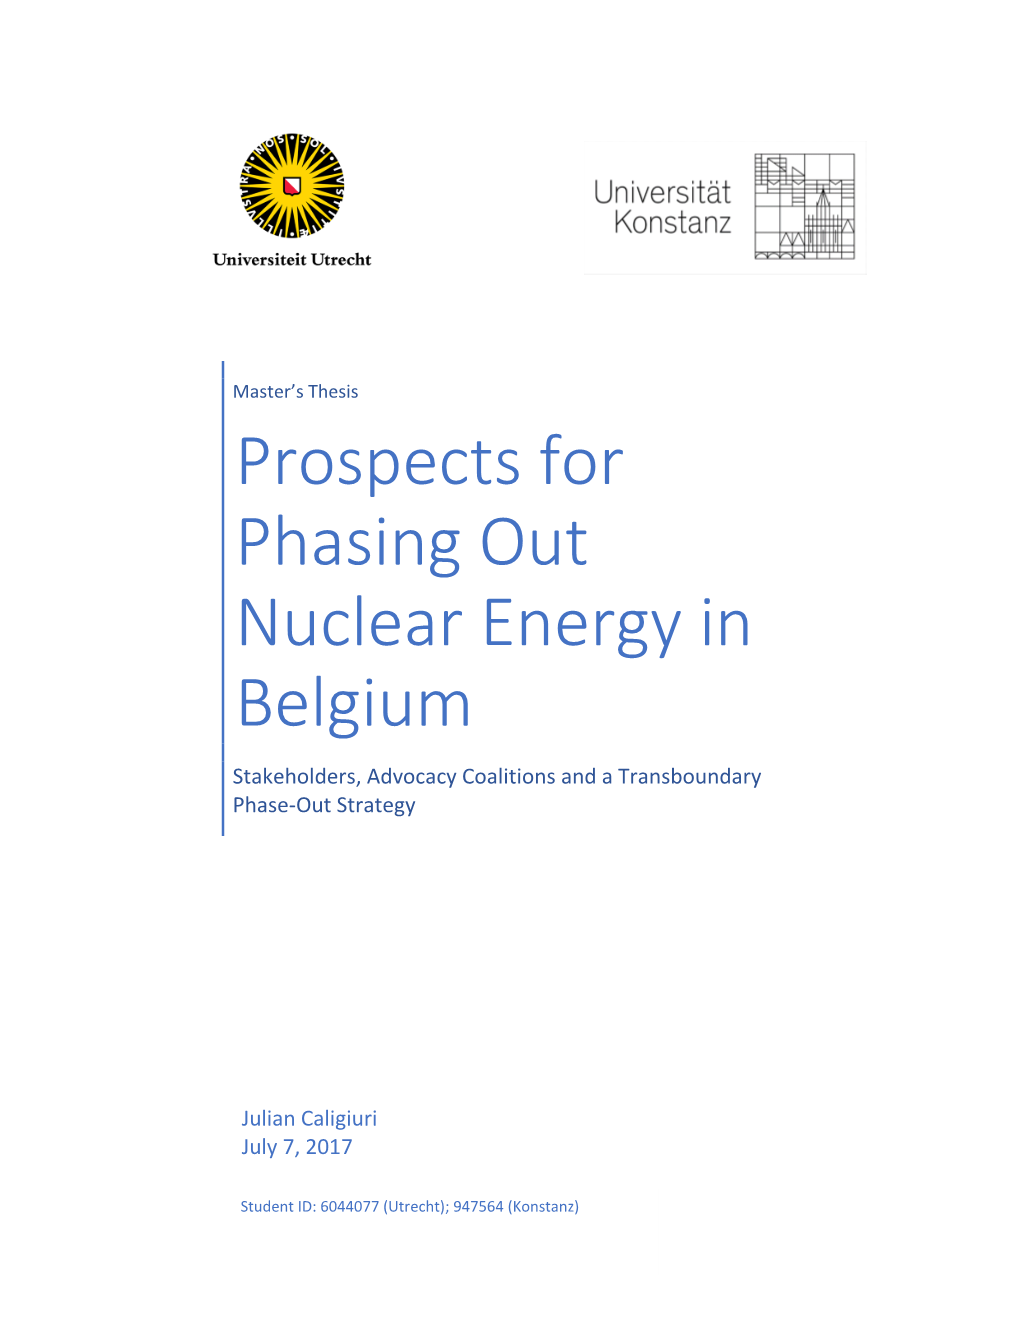 Prospects for Phasing out Nuclear Energy in Belgium Stakeholders, Advocacy Coalitions and a Transboundary Phase-Out Strategy